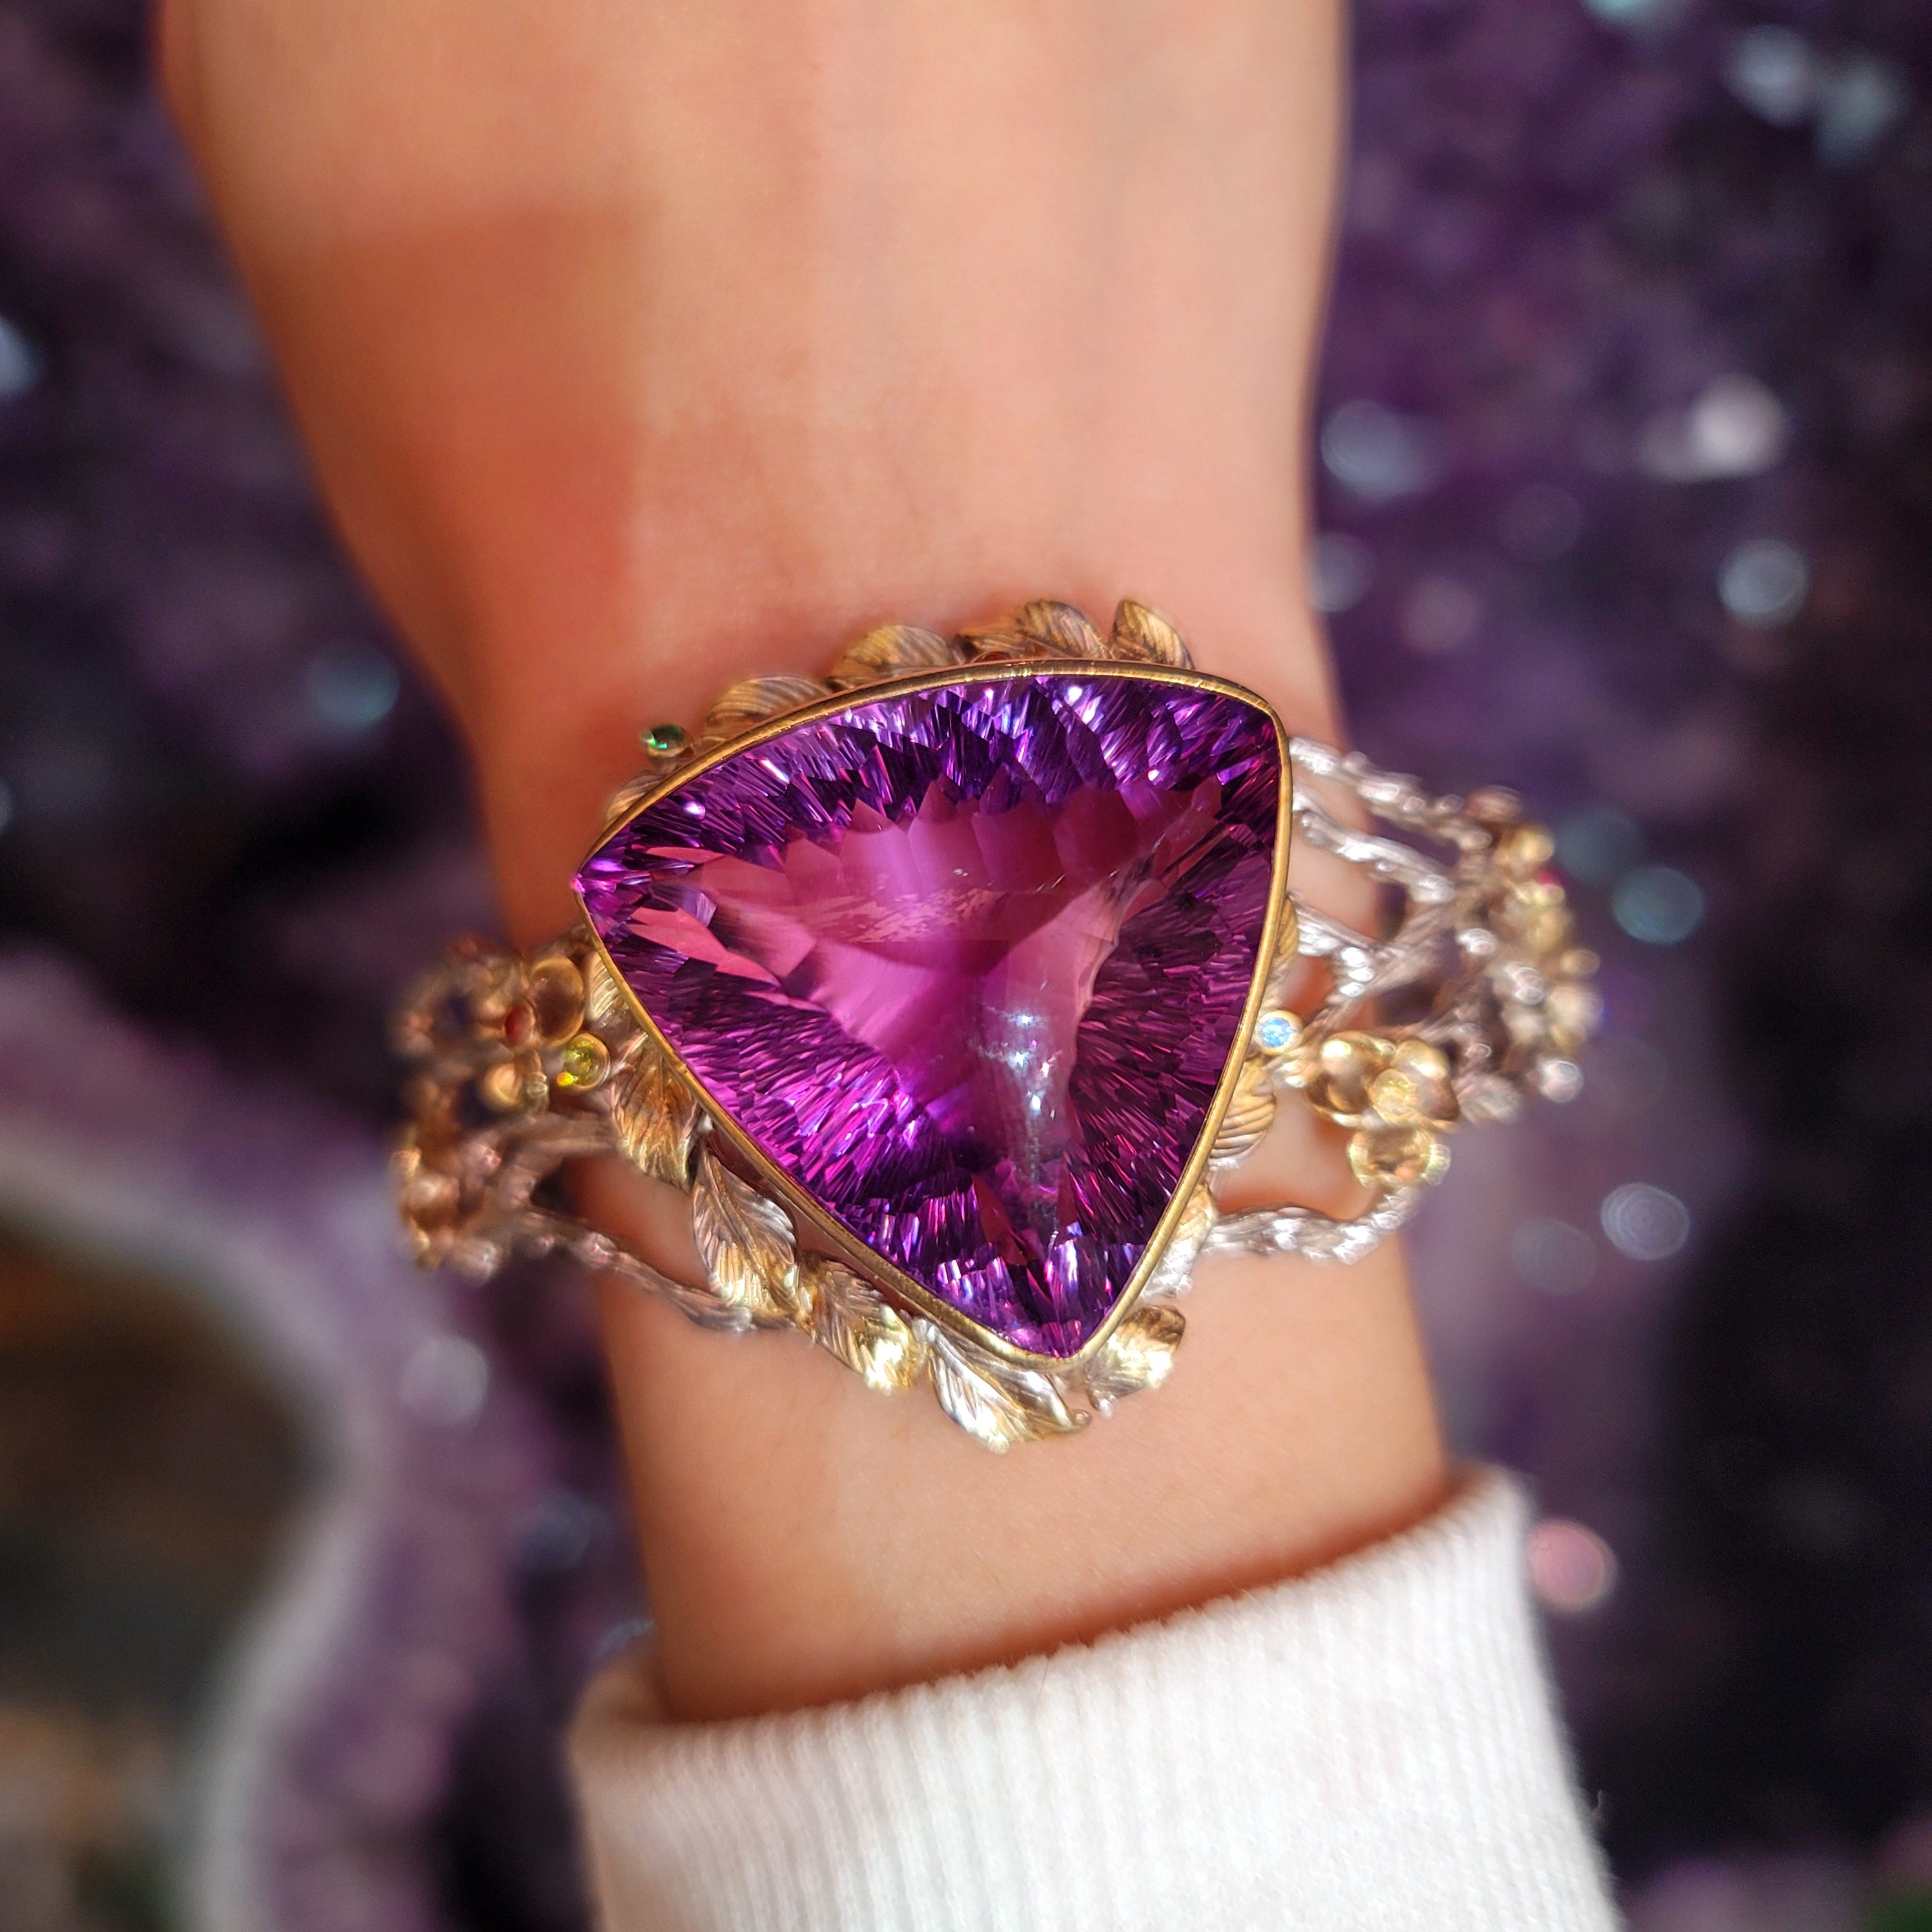 Amethyst Enchanted Cuff Bracelet for Intuition, Connection with the Divine and Sobriety